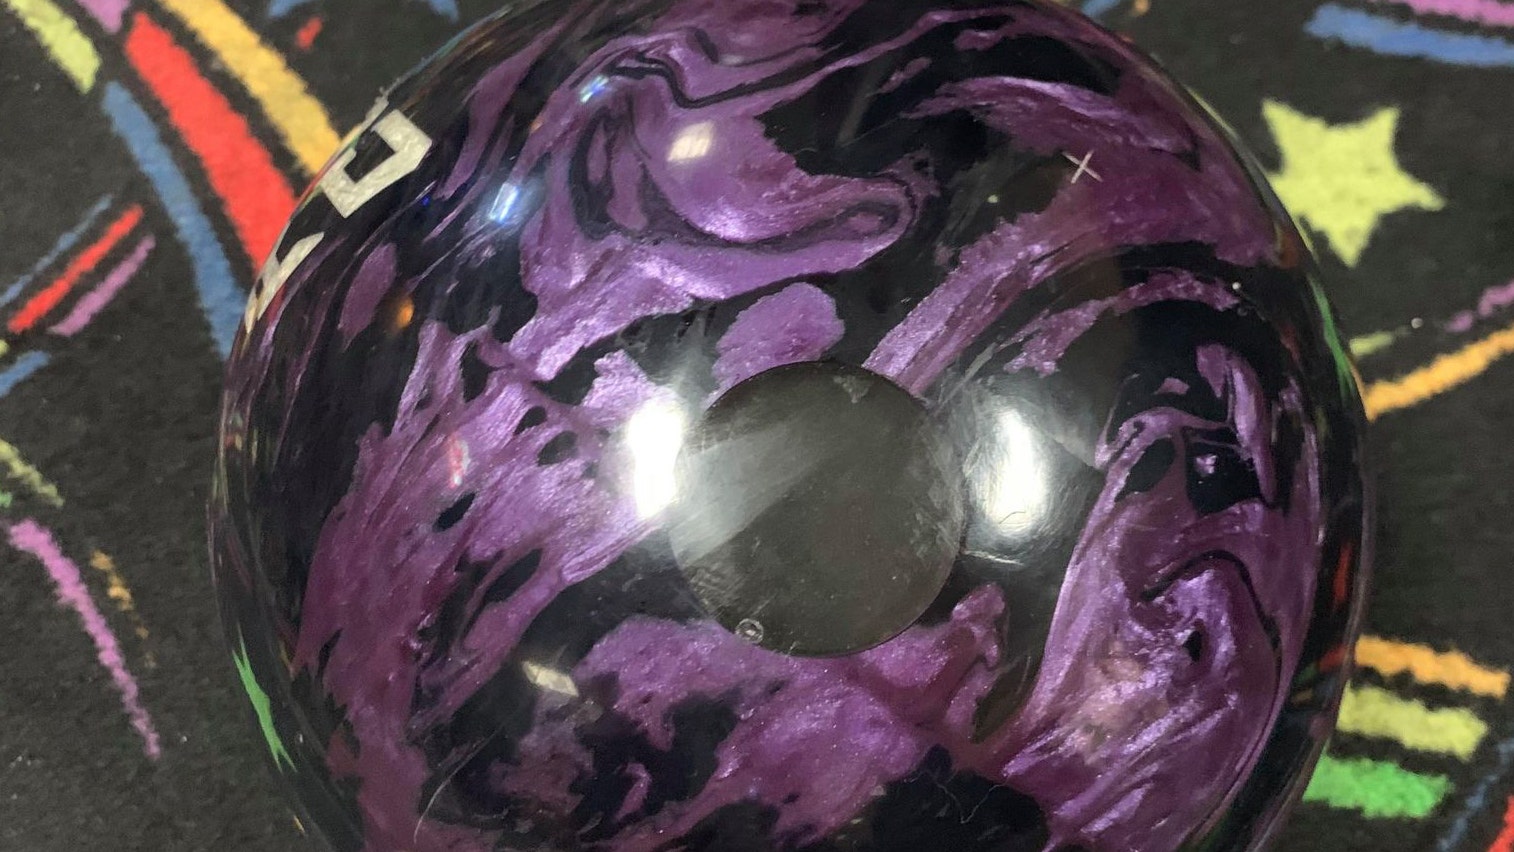 Illinois man puts dad's ashes into ball, bowls perfect game